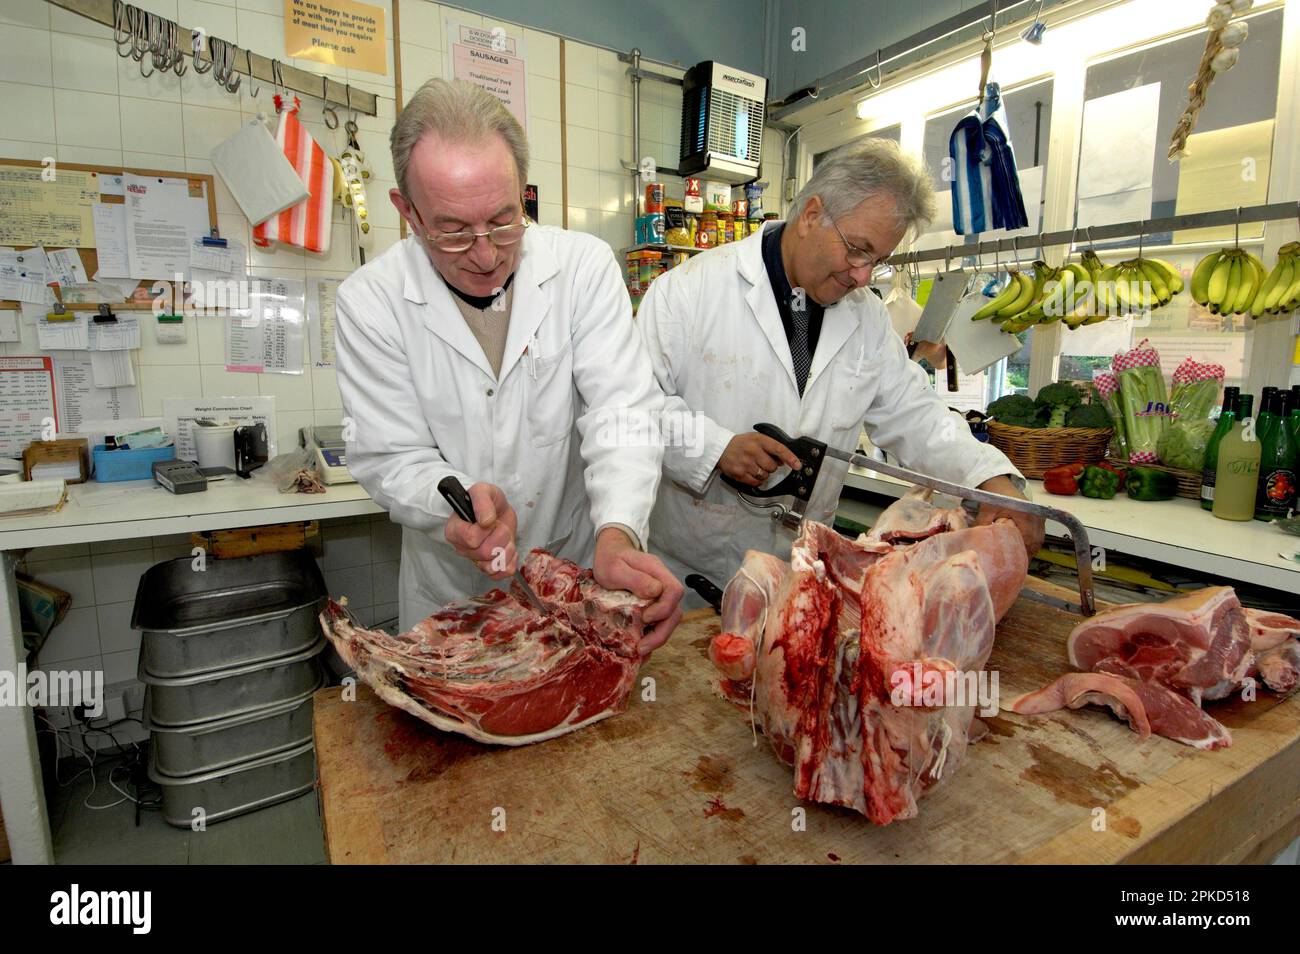 Butchers, boning of beef loin and cutting of lamb, S. W. Doughty's Butchers, Doddington, Kent, England, Great Britain Stock Photo